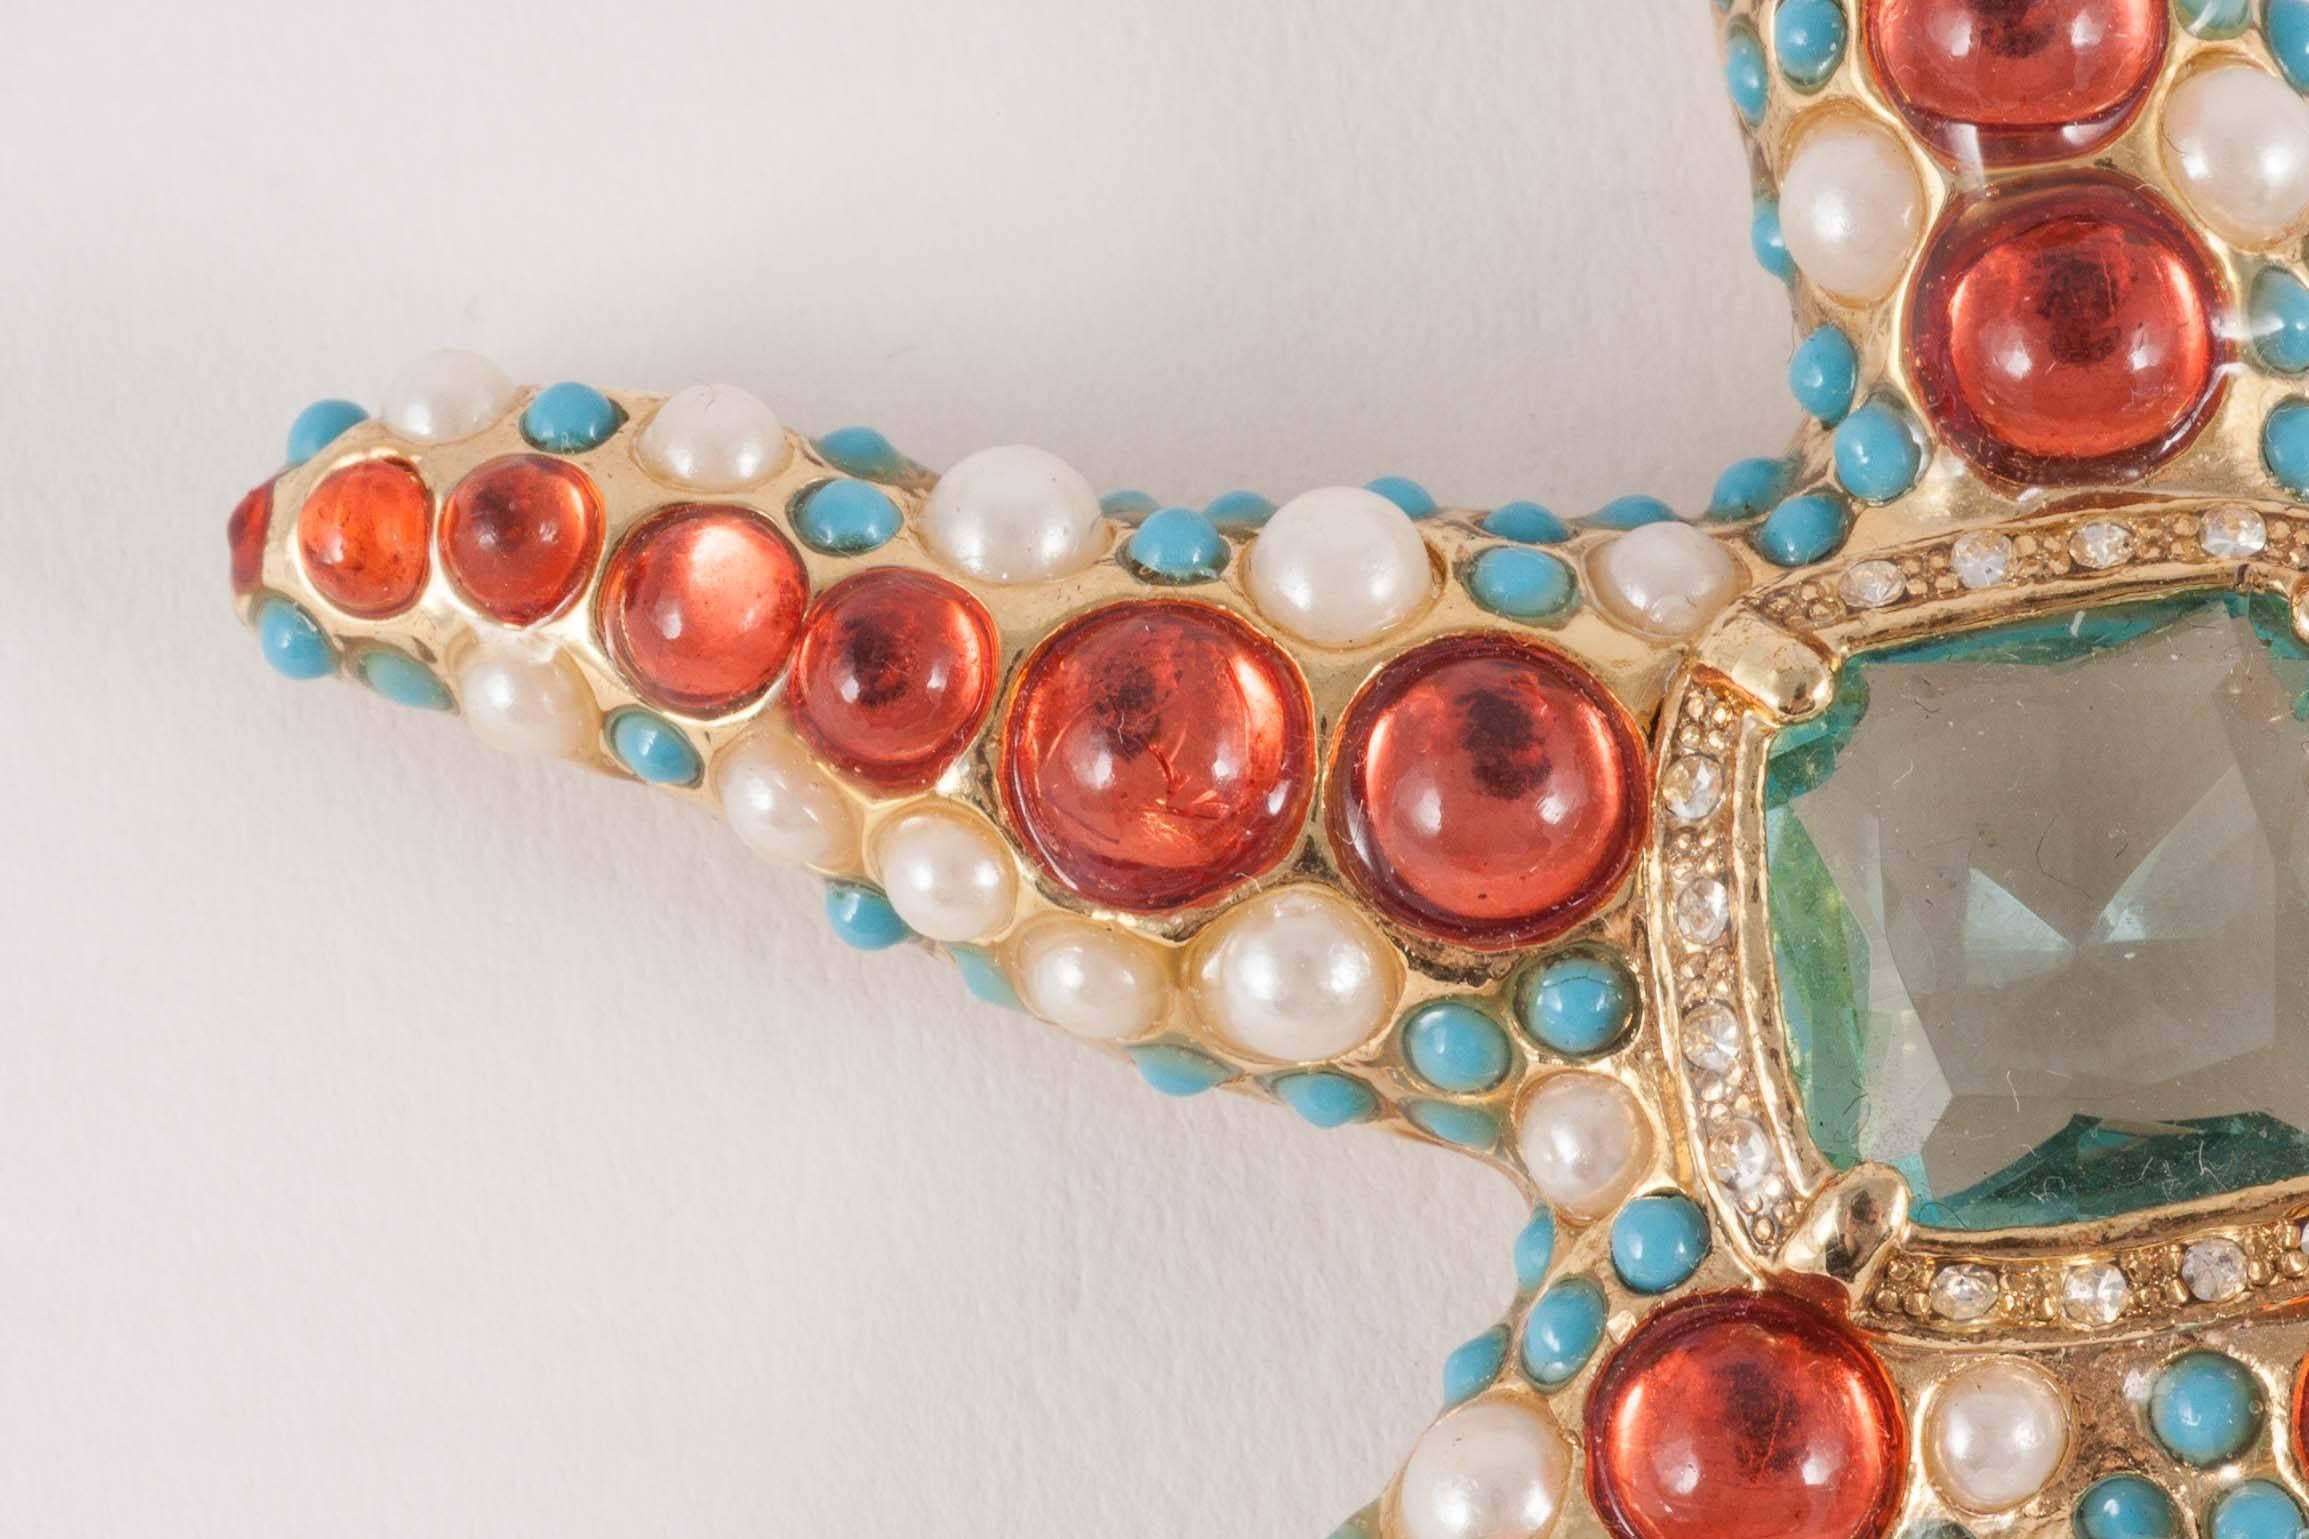 Fun and imaginative 'starfish' brooch,by Kenneth Jay Lane , from the 1960s, in a mixture of coral and turquoise cabuchons, with pearl highlights set in gilded metal. Chic and playful, this would adorn any Summer or Winter outfit, all year